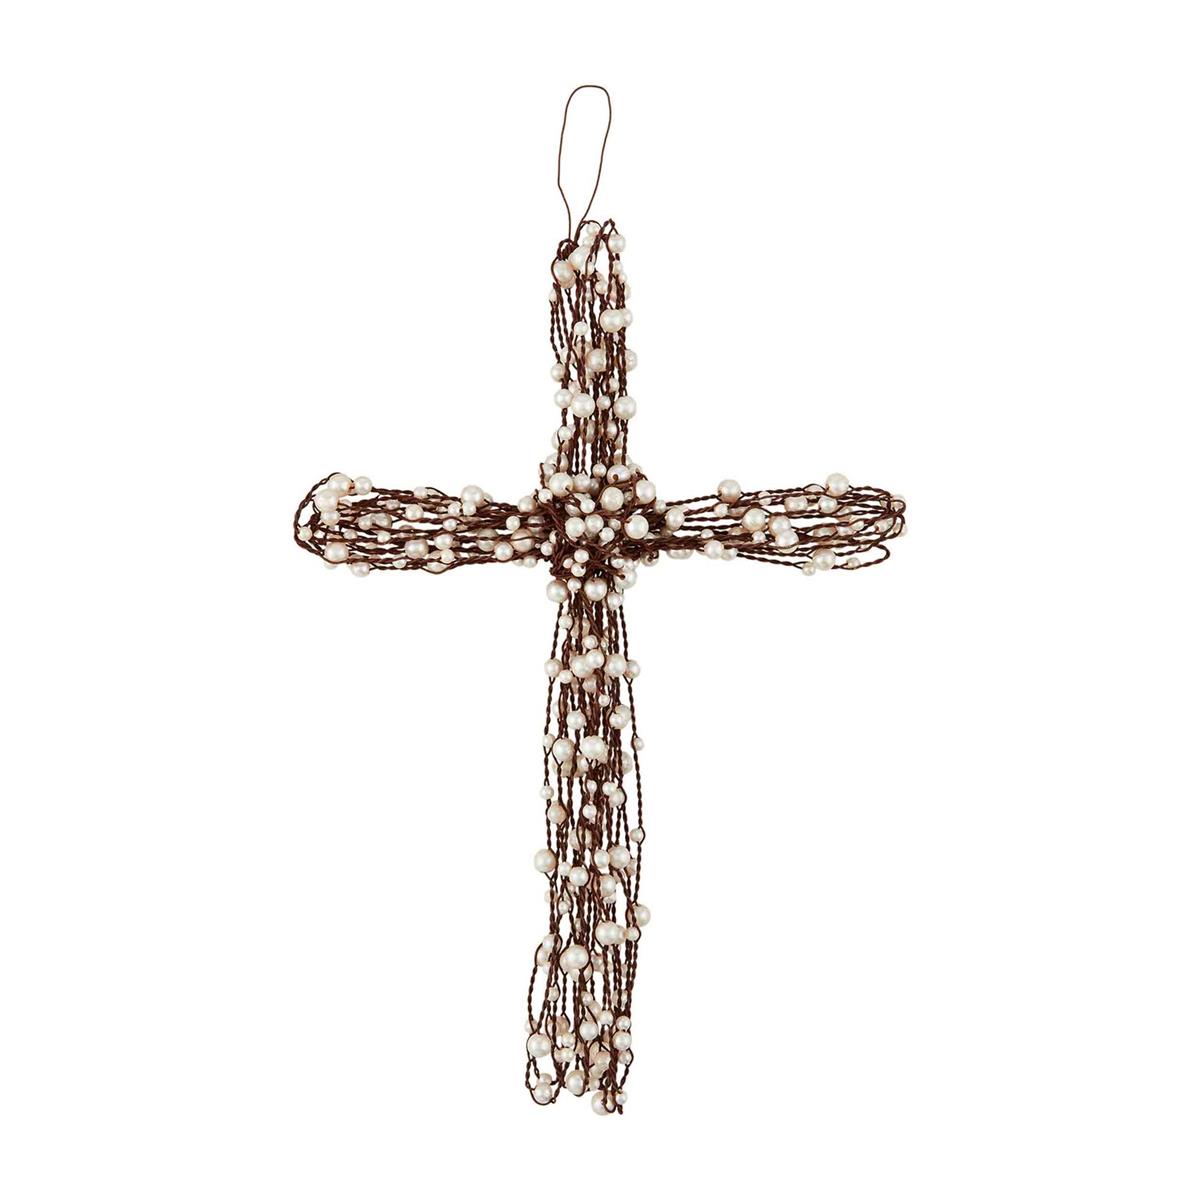 crosses made from wire